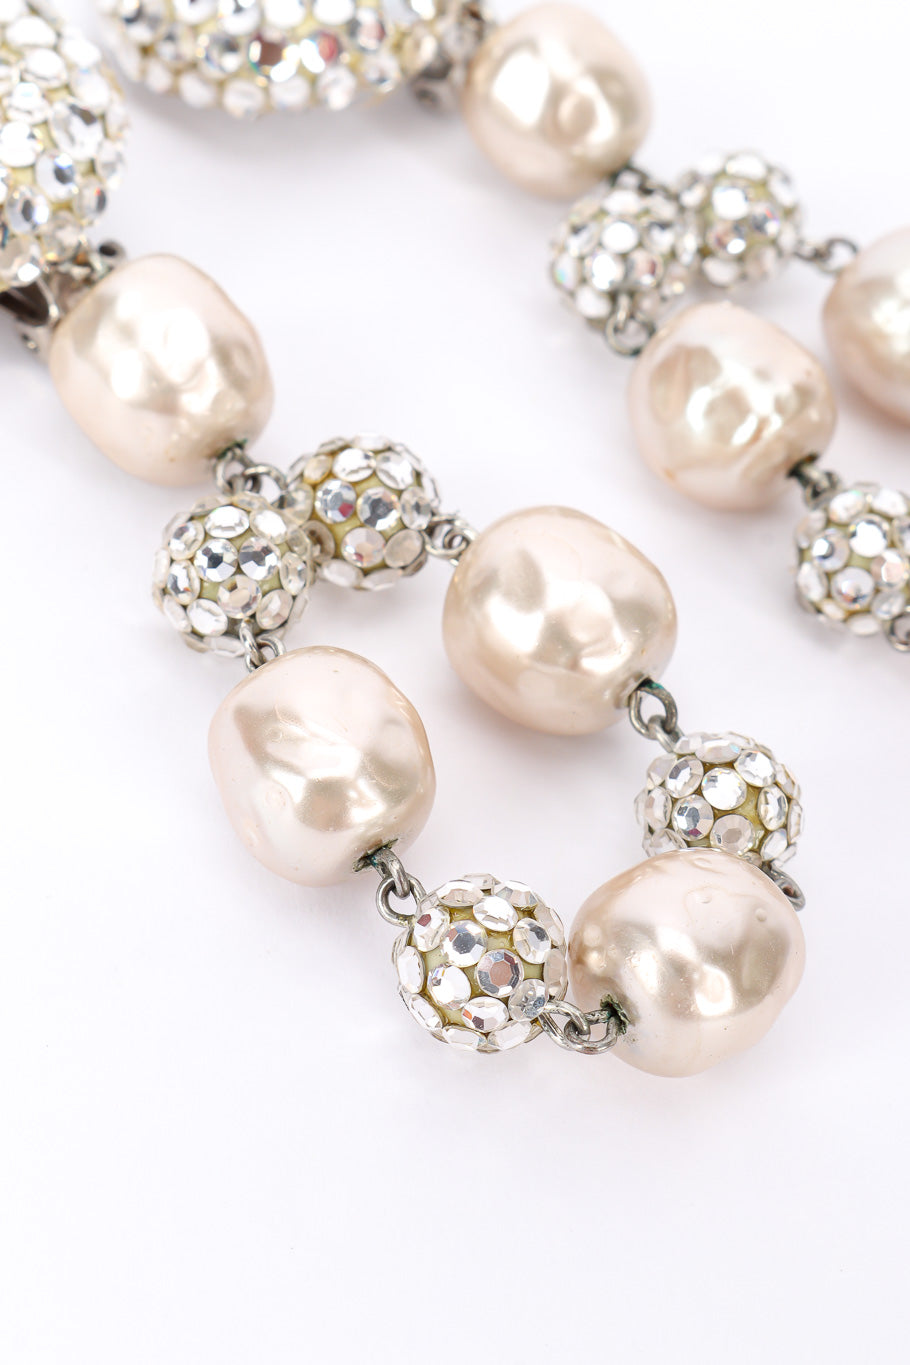 Pearl drop earrings by James Arpad on white background bottoms @recessla